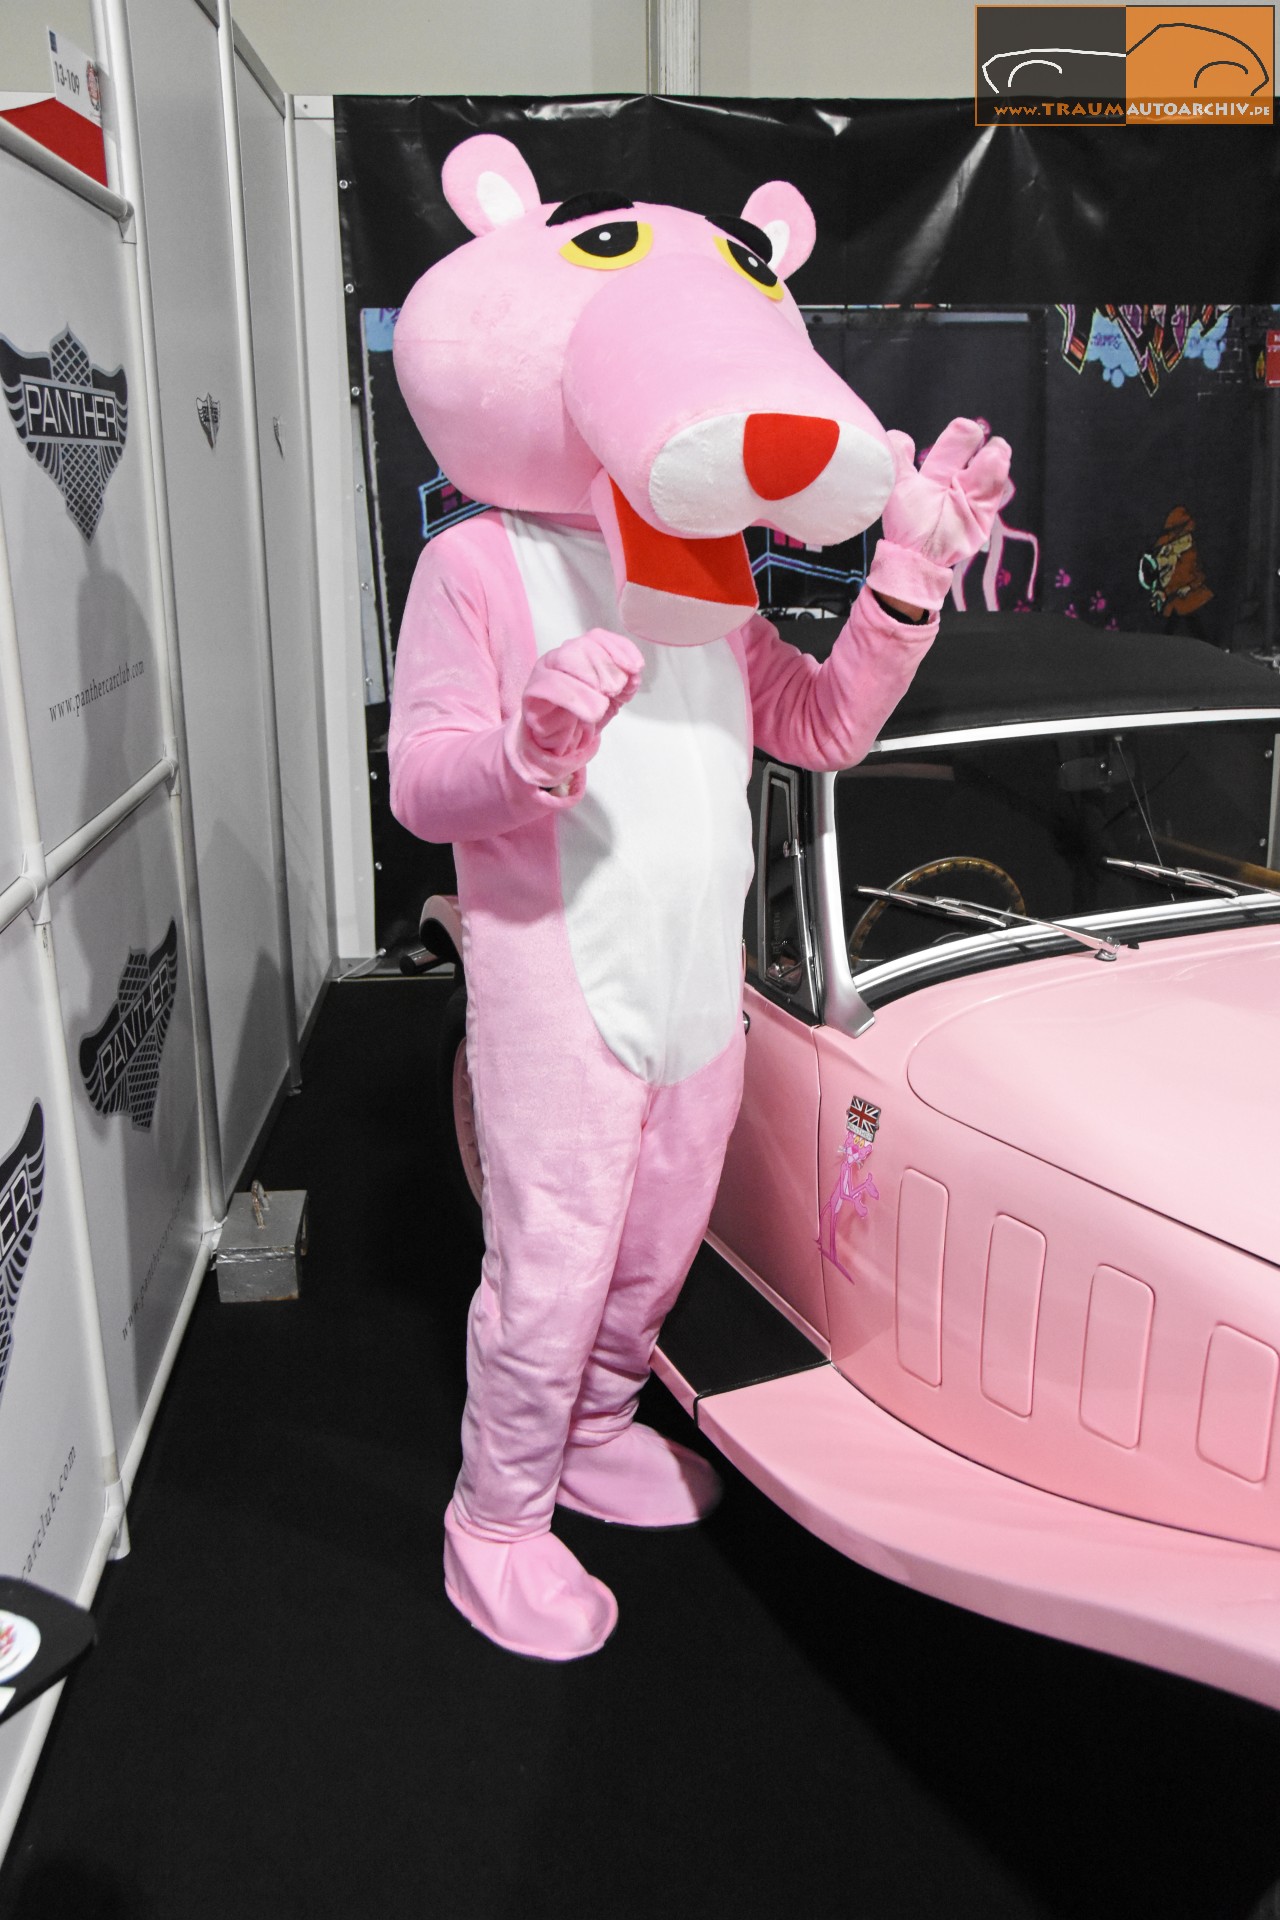 _Techno Classica 2017 - Pink Panther.jpg 394.4K